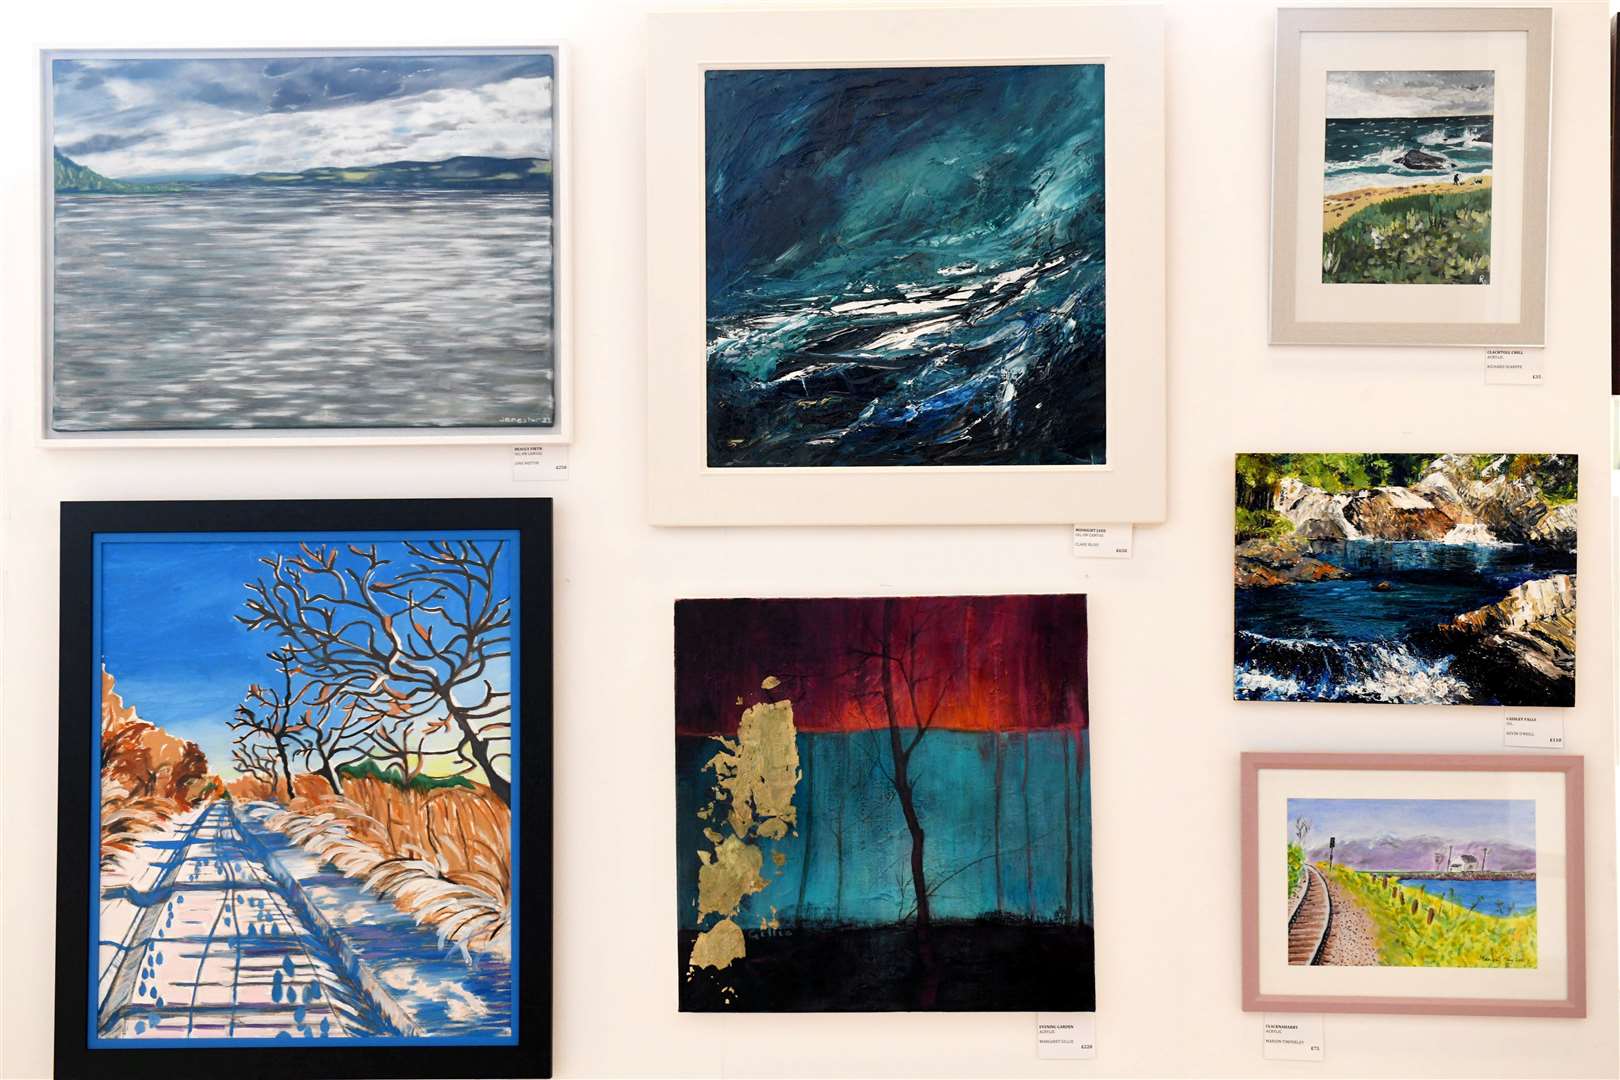 Work by Clare Blois, Margaret Gillie, Marion Timperley and others.